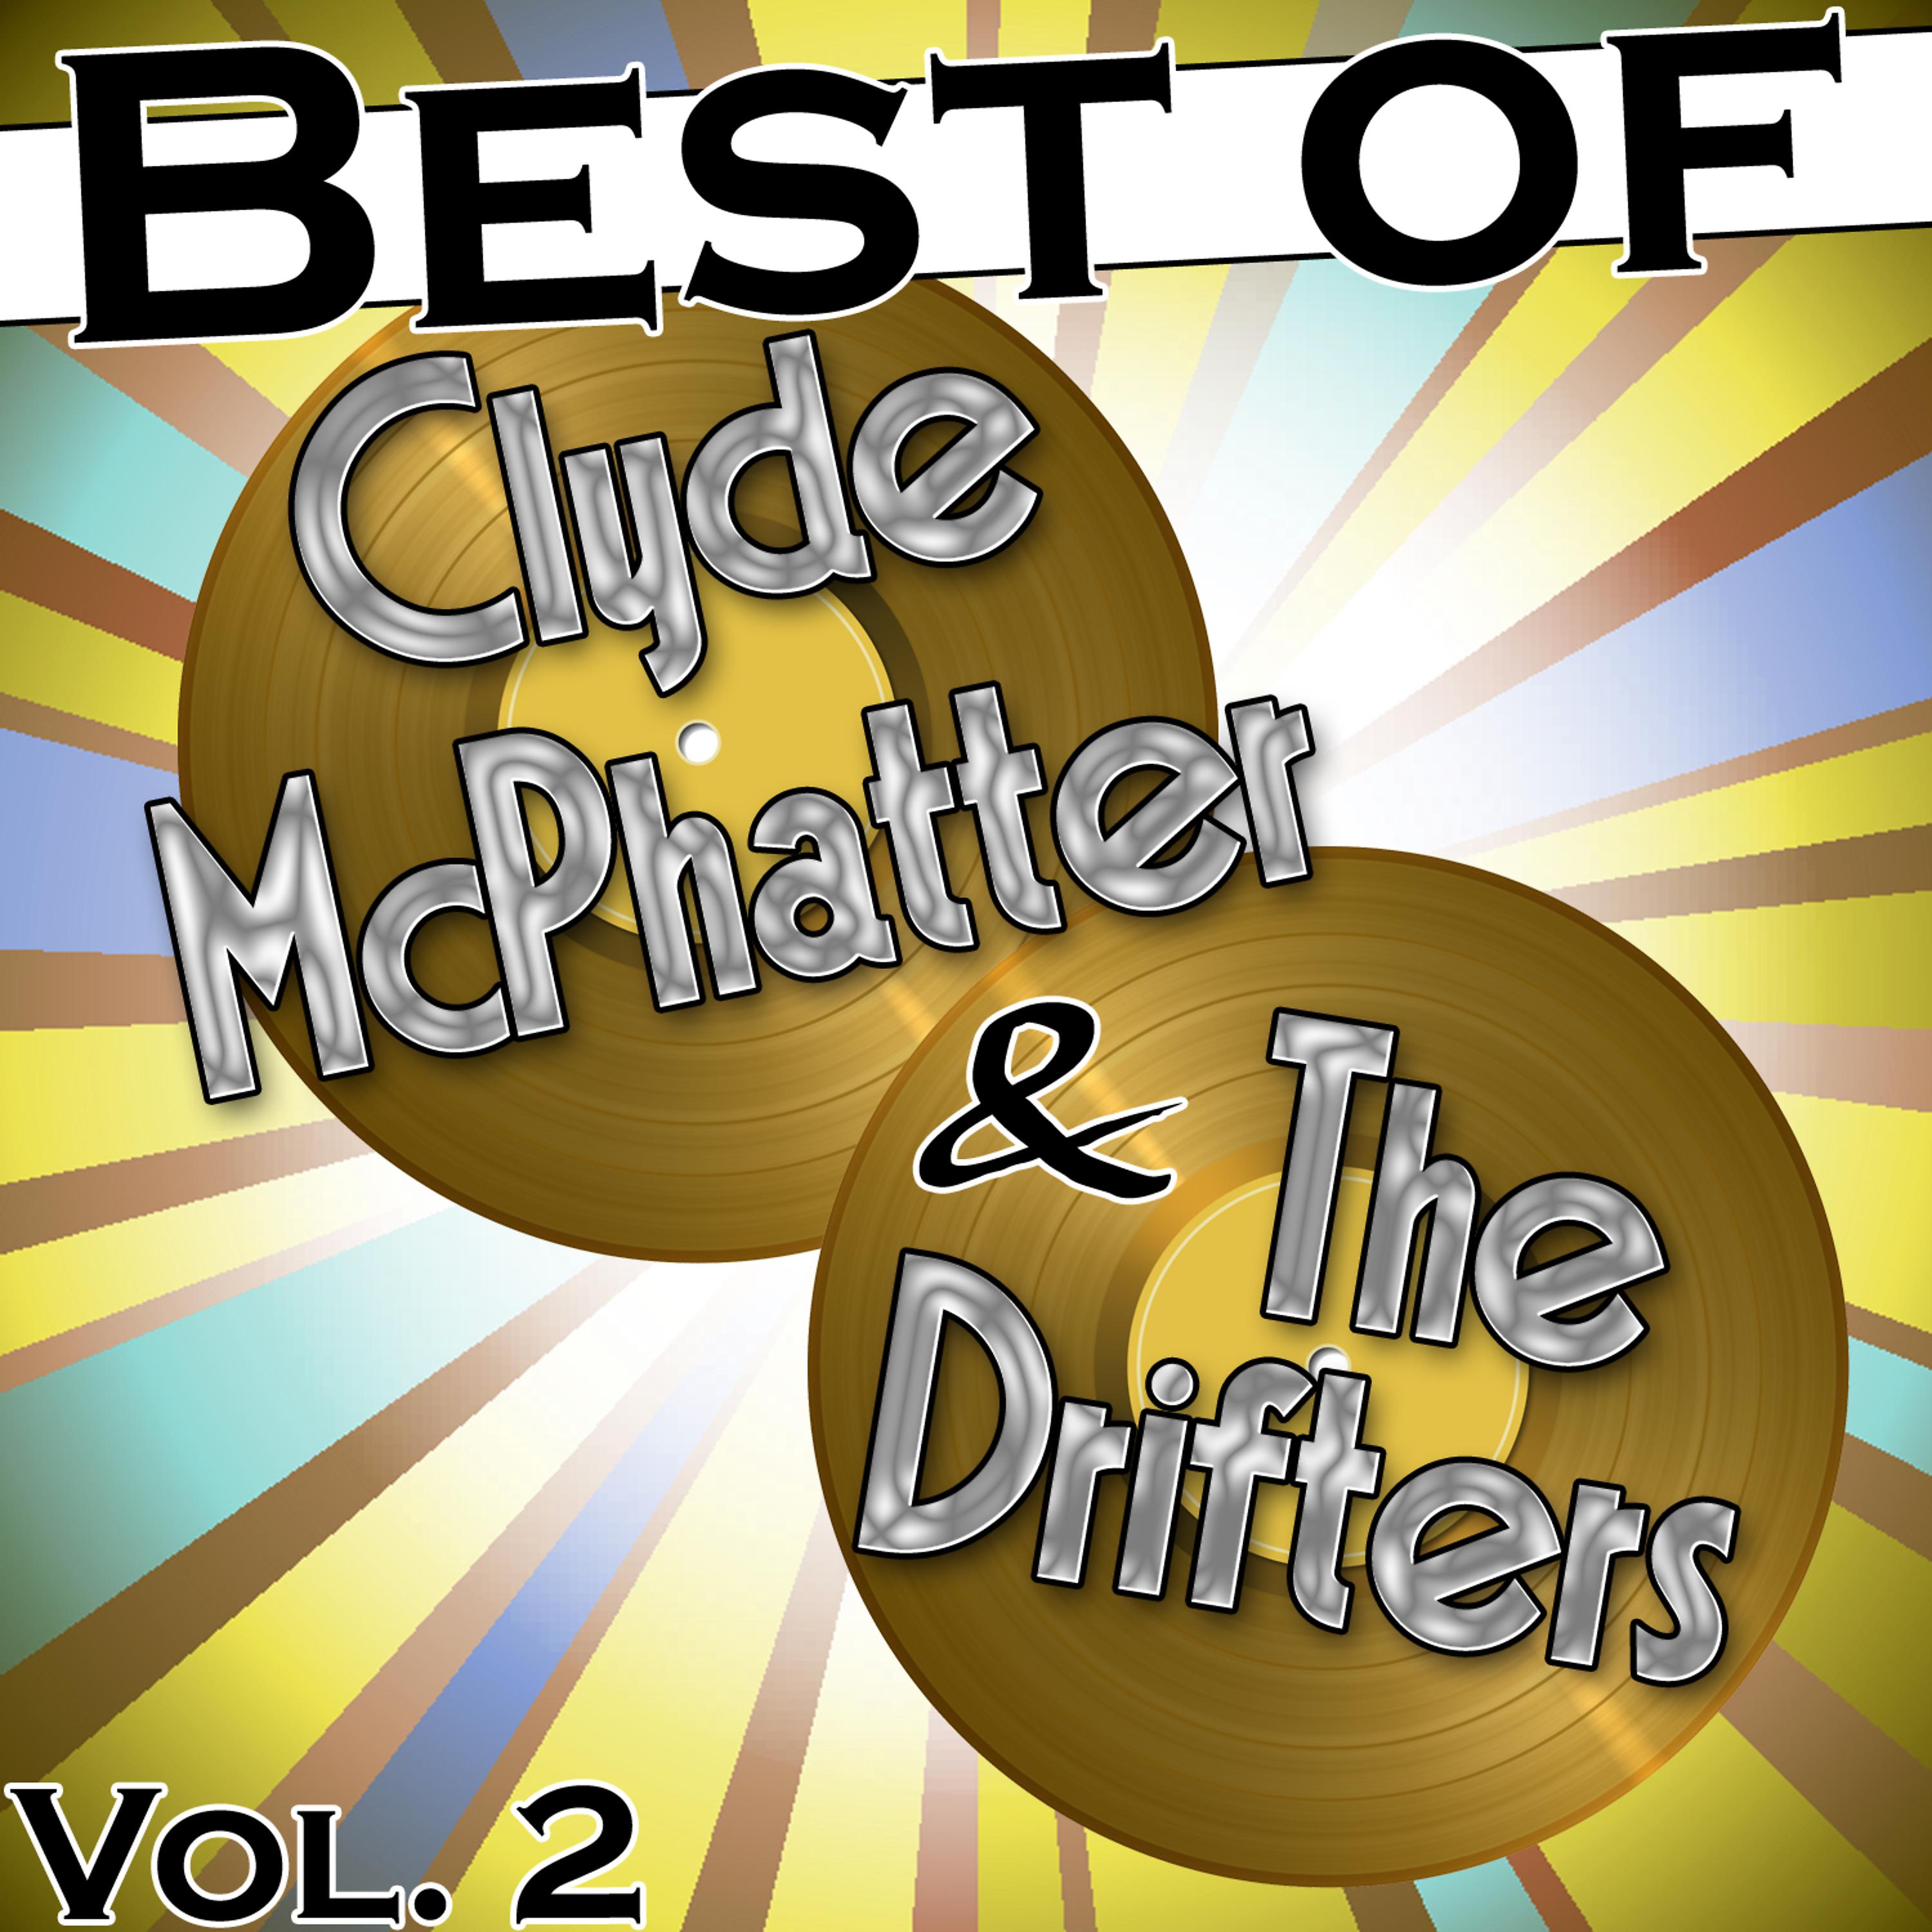 Постер альбома Best of Clyde Mcphatter & The Drifters, Vol. 2